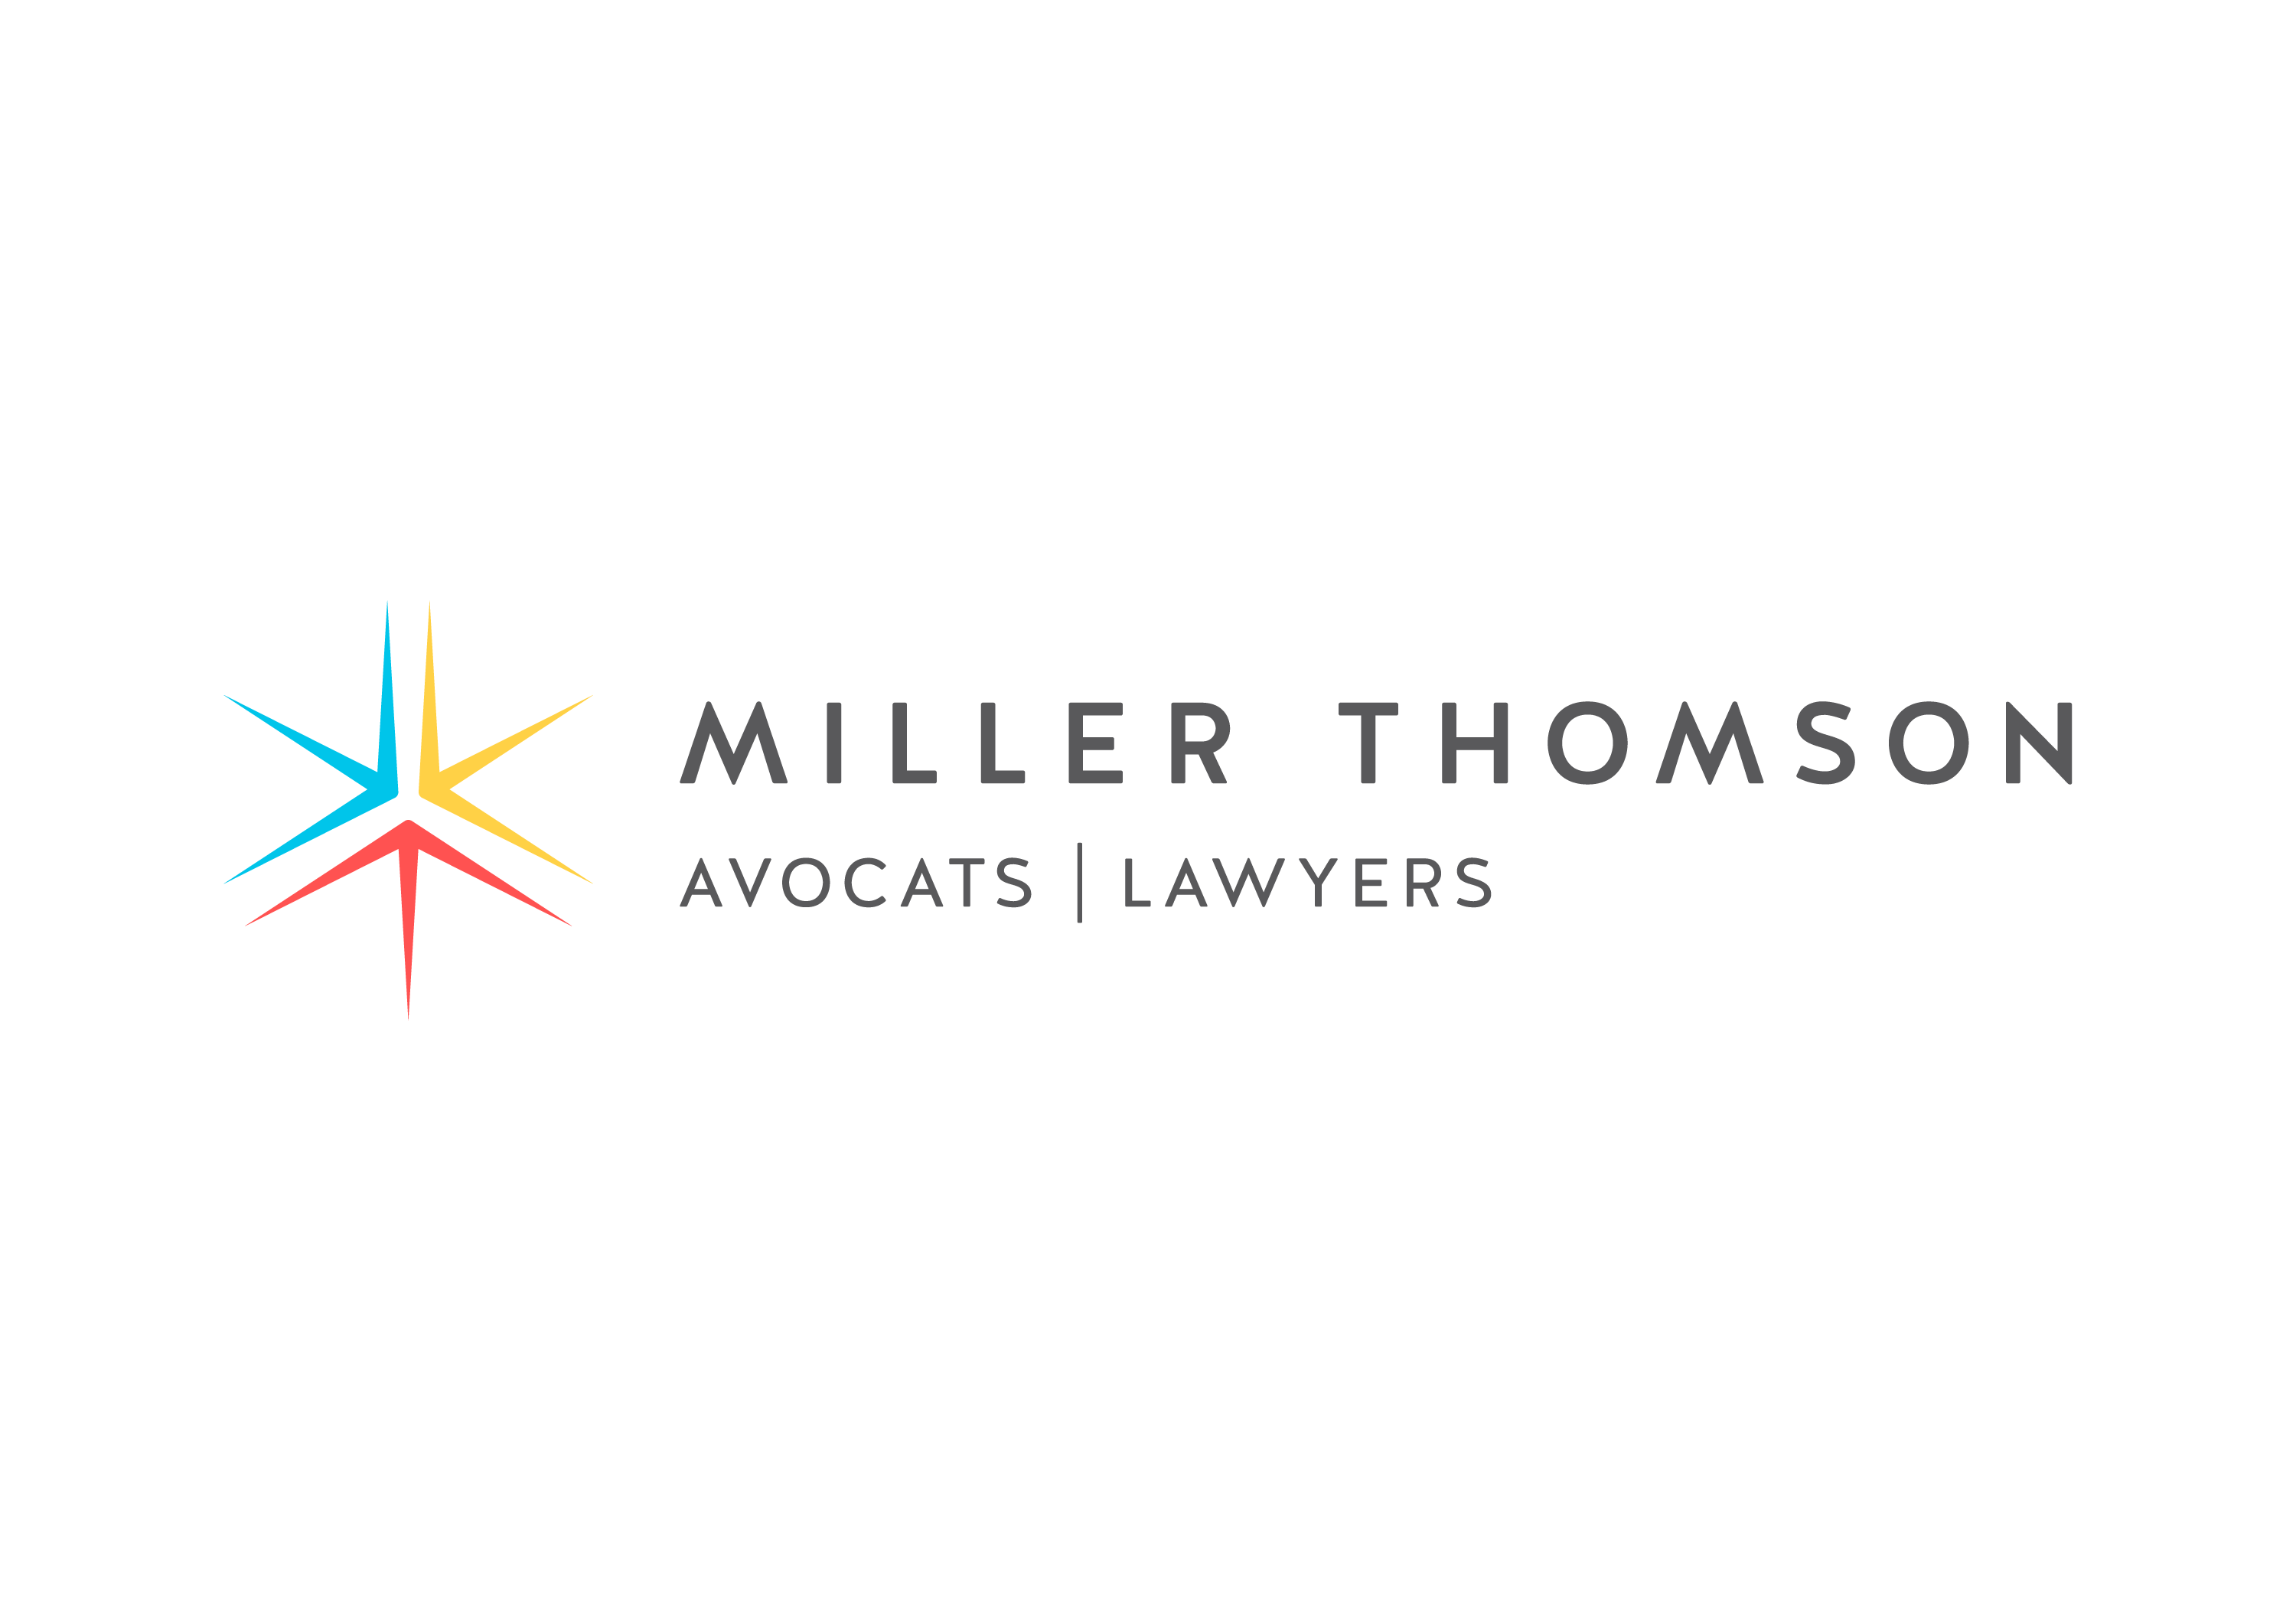 Miller Thomson Avocats Lawyers